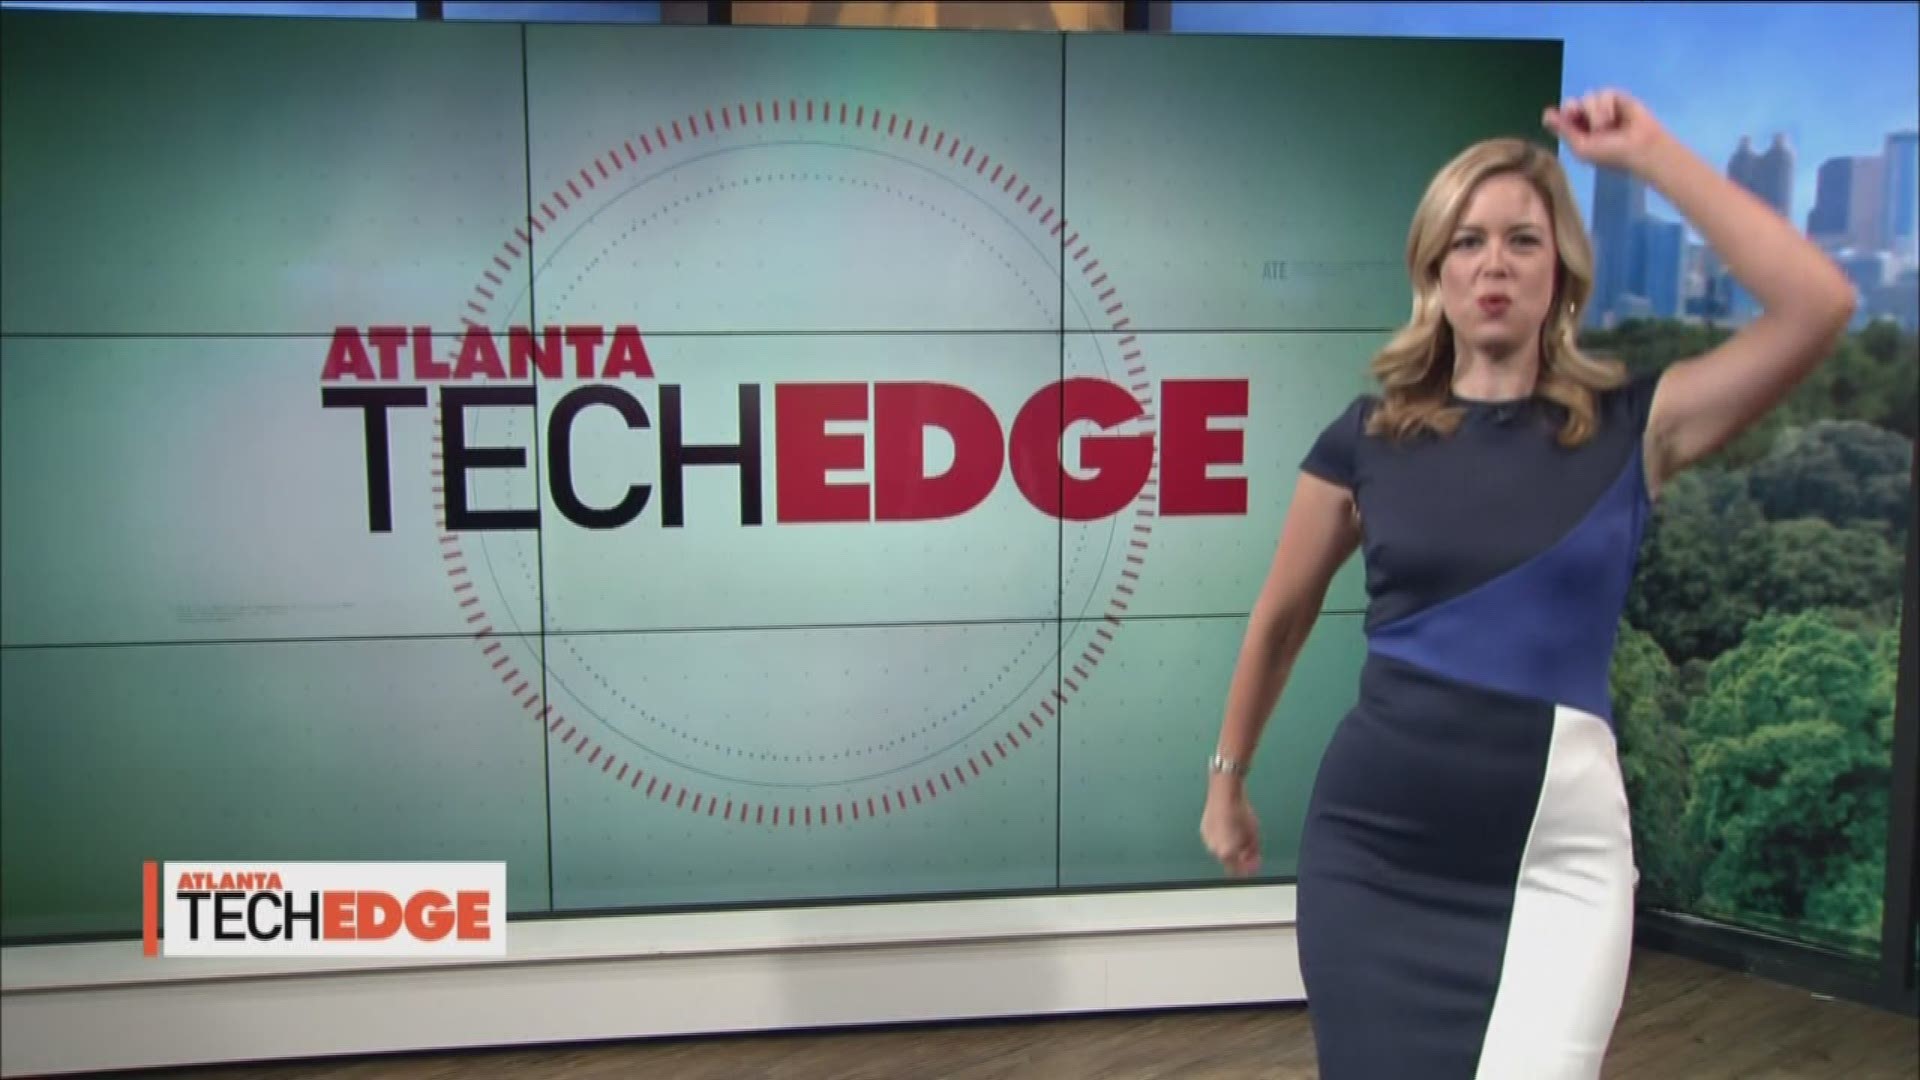 Our favorite moments and memories on 'Atlanta Tech Edge'... lots of dancing of course included!